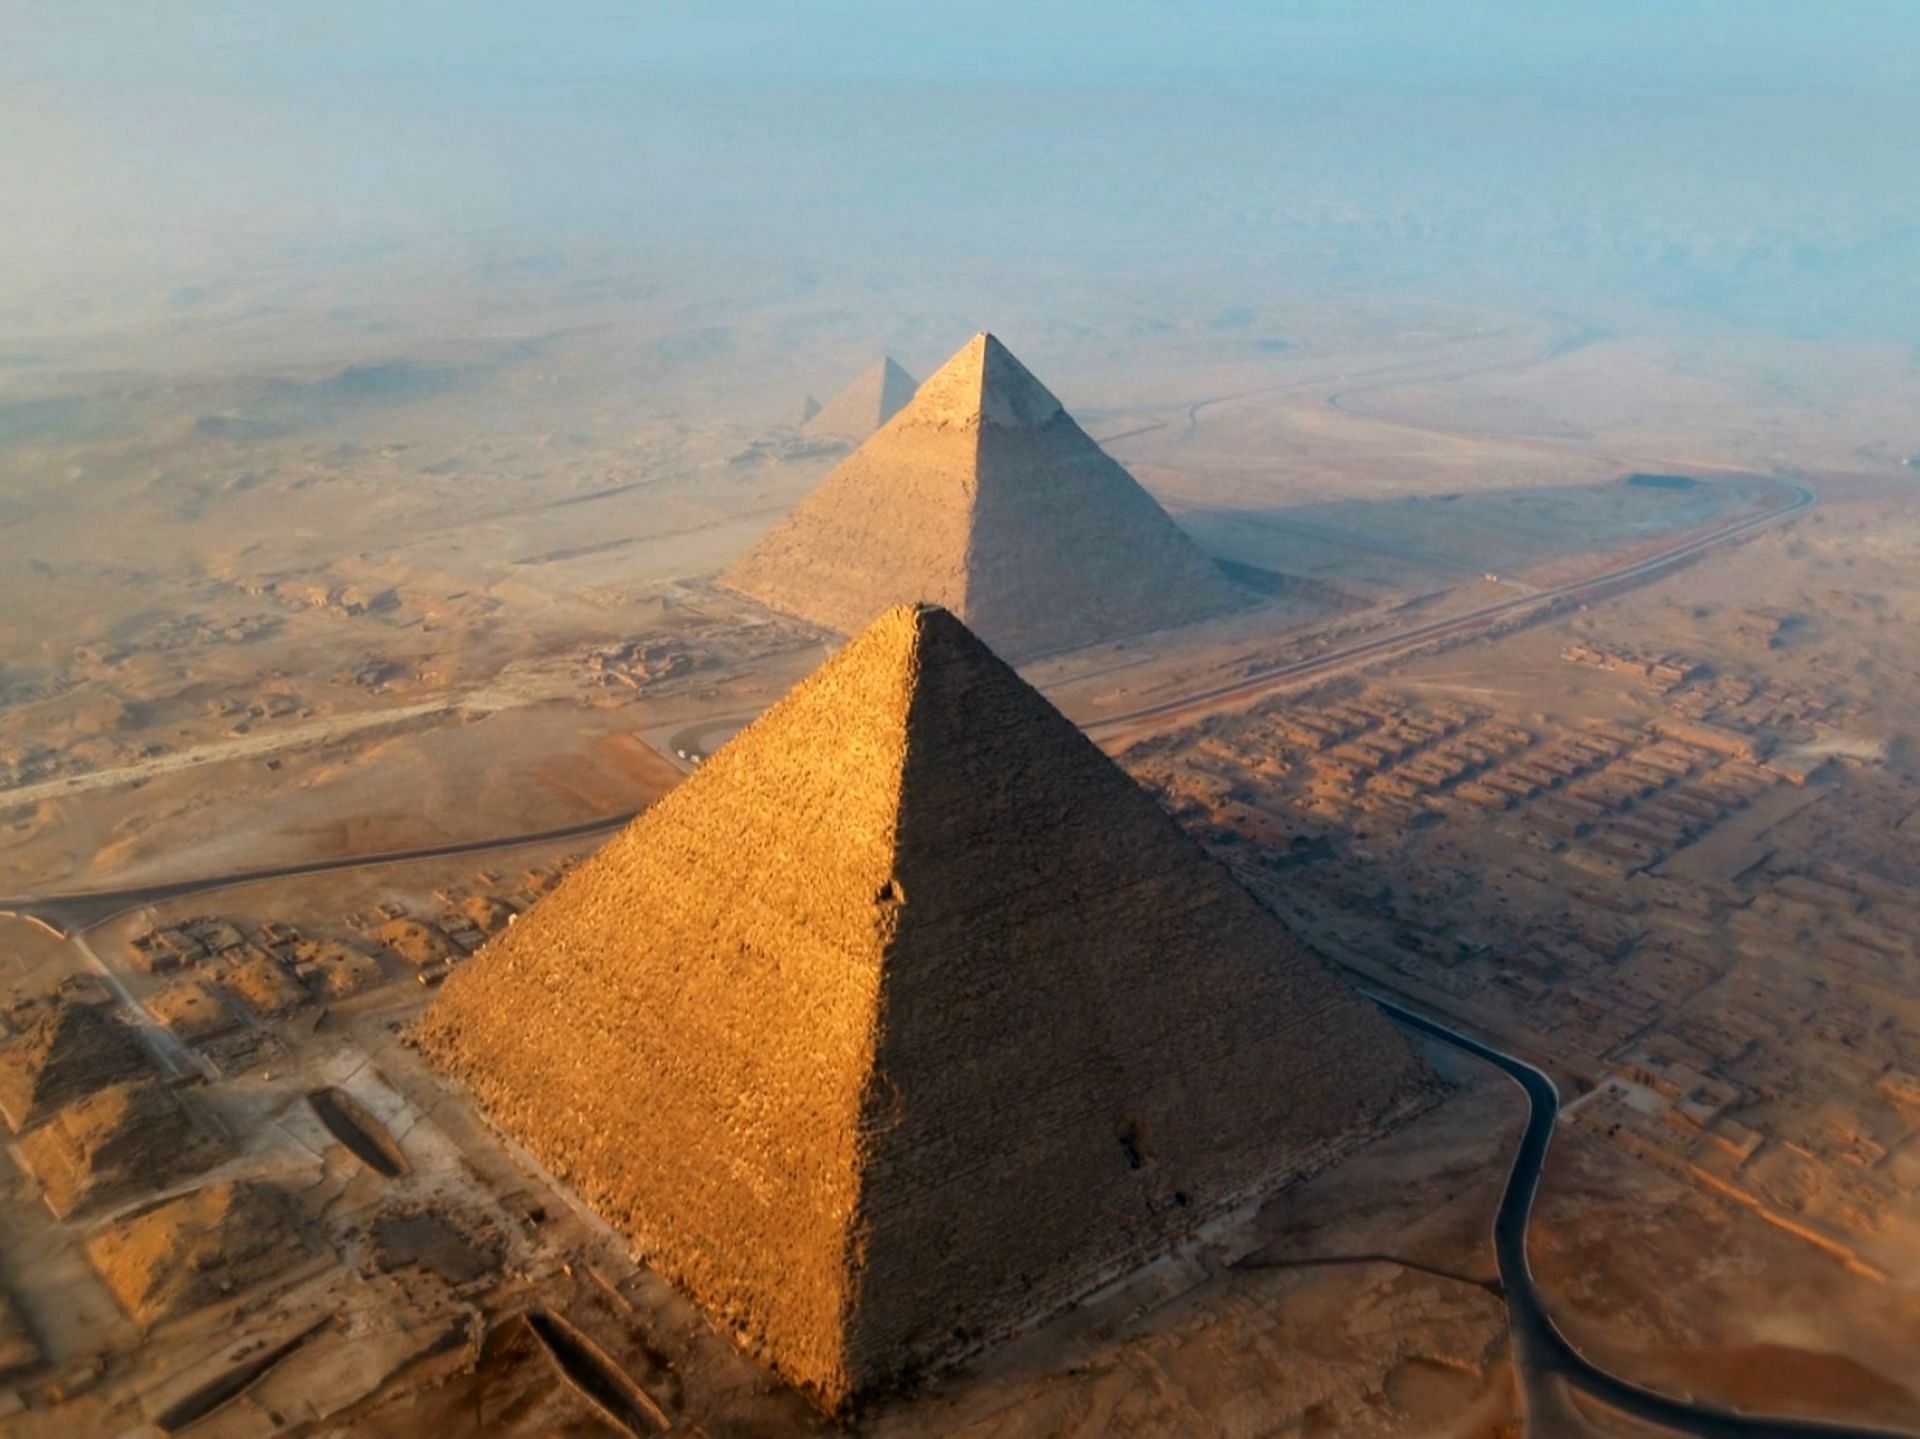 Egyptian Pyramids provide clue on why Bungie chose that shape to represent Darkness (Image via National Geographic)